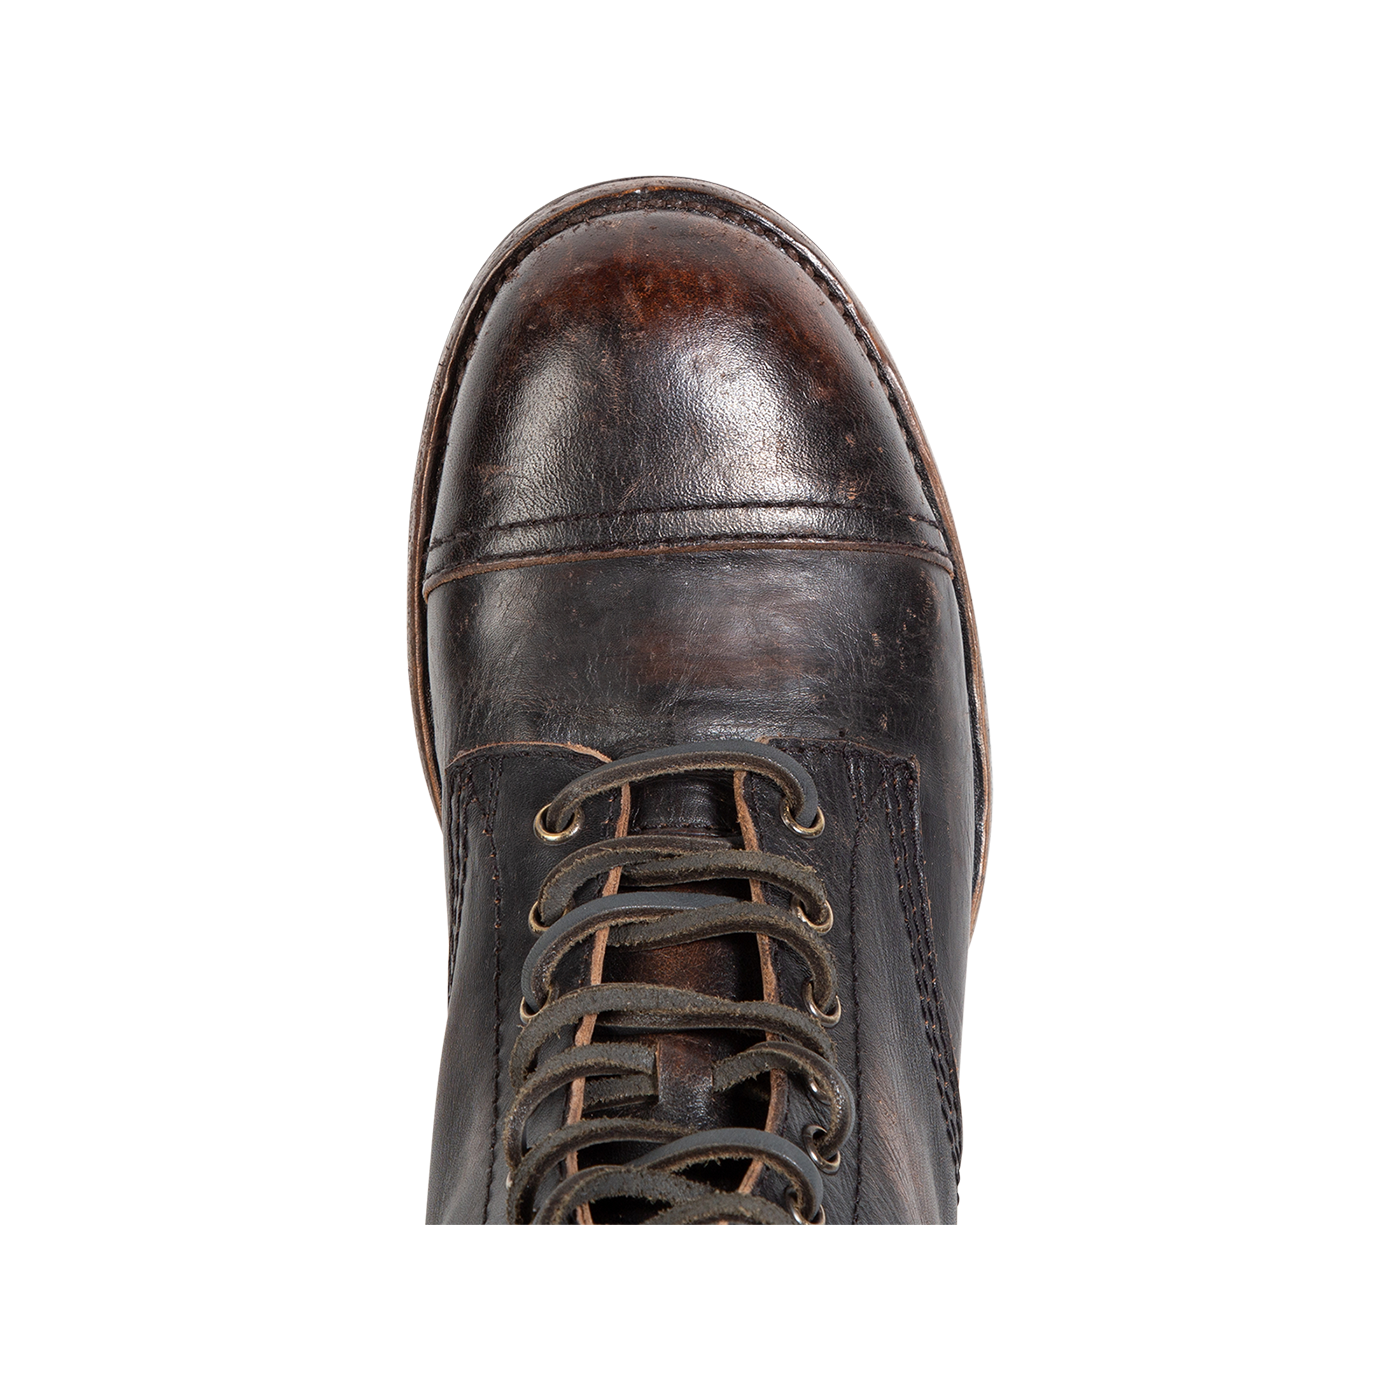 Top view showing round toe and leather lacing on FREEBIRD men's Leavenworth black distressed boot